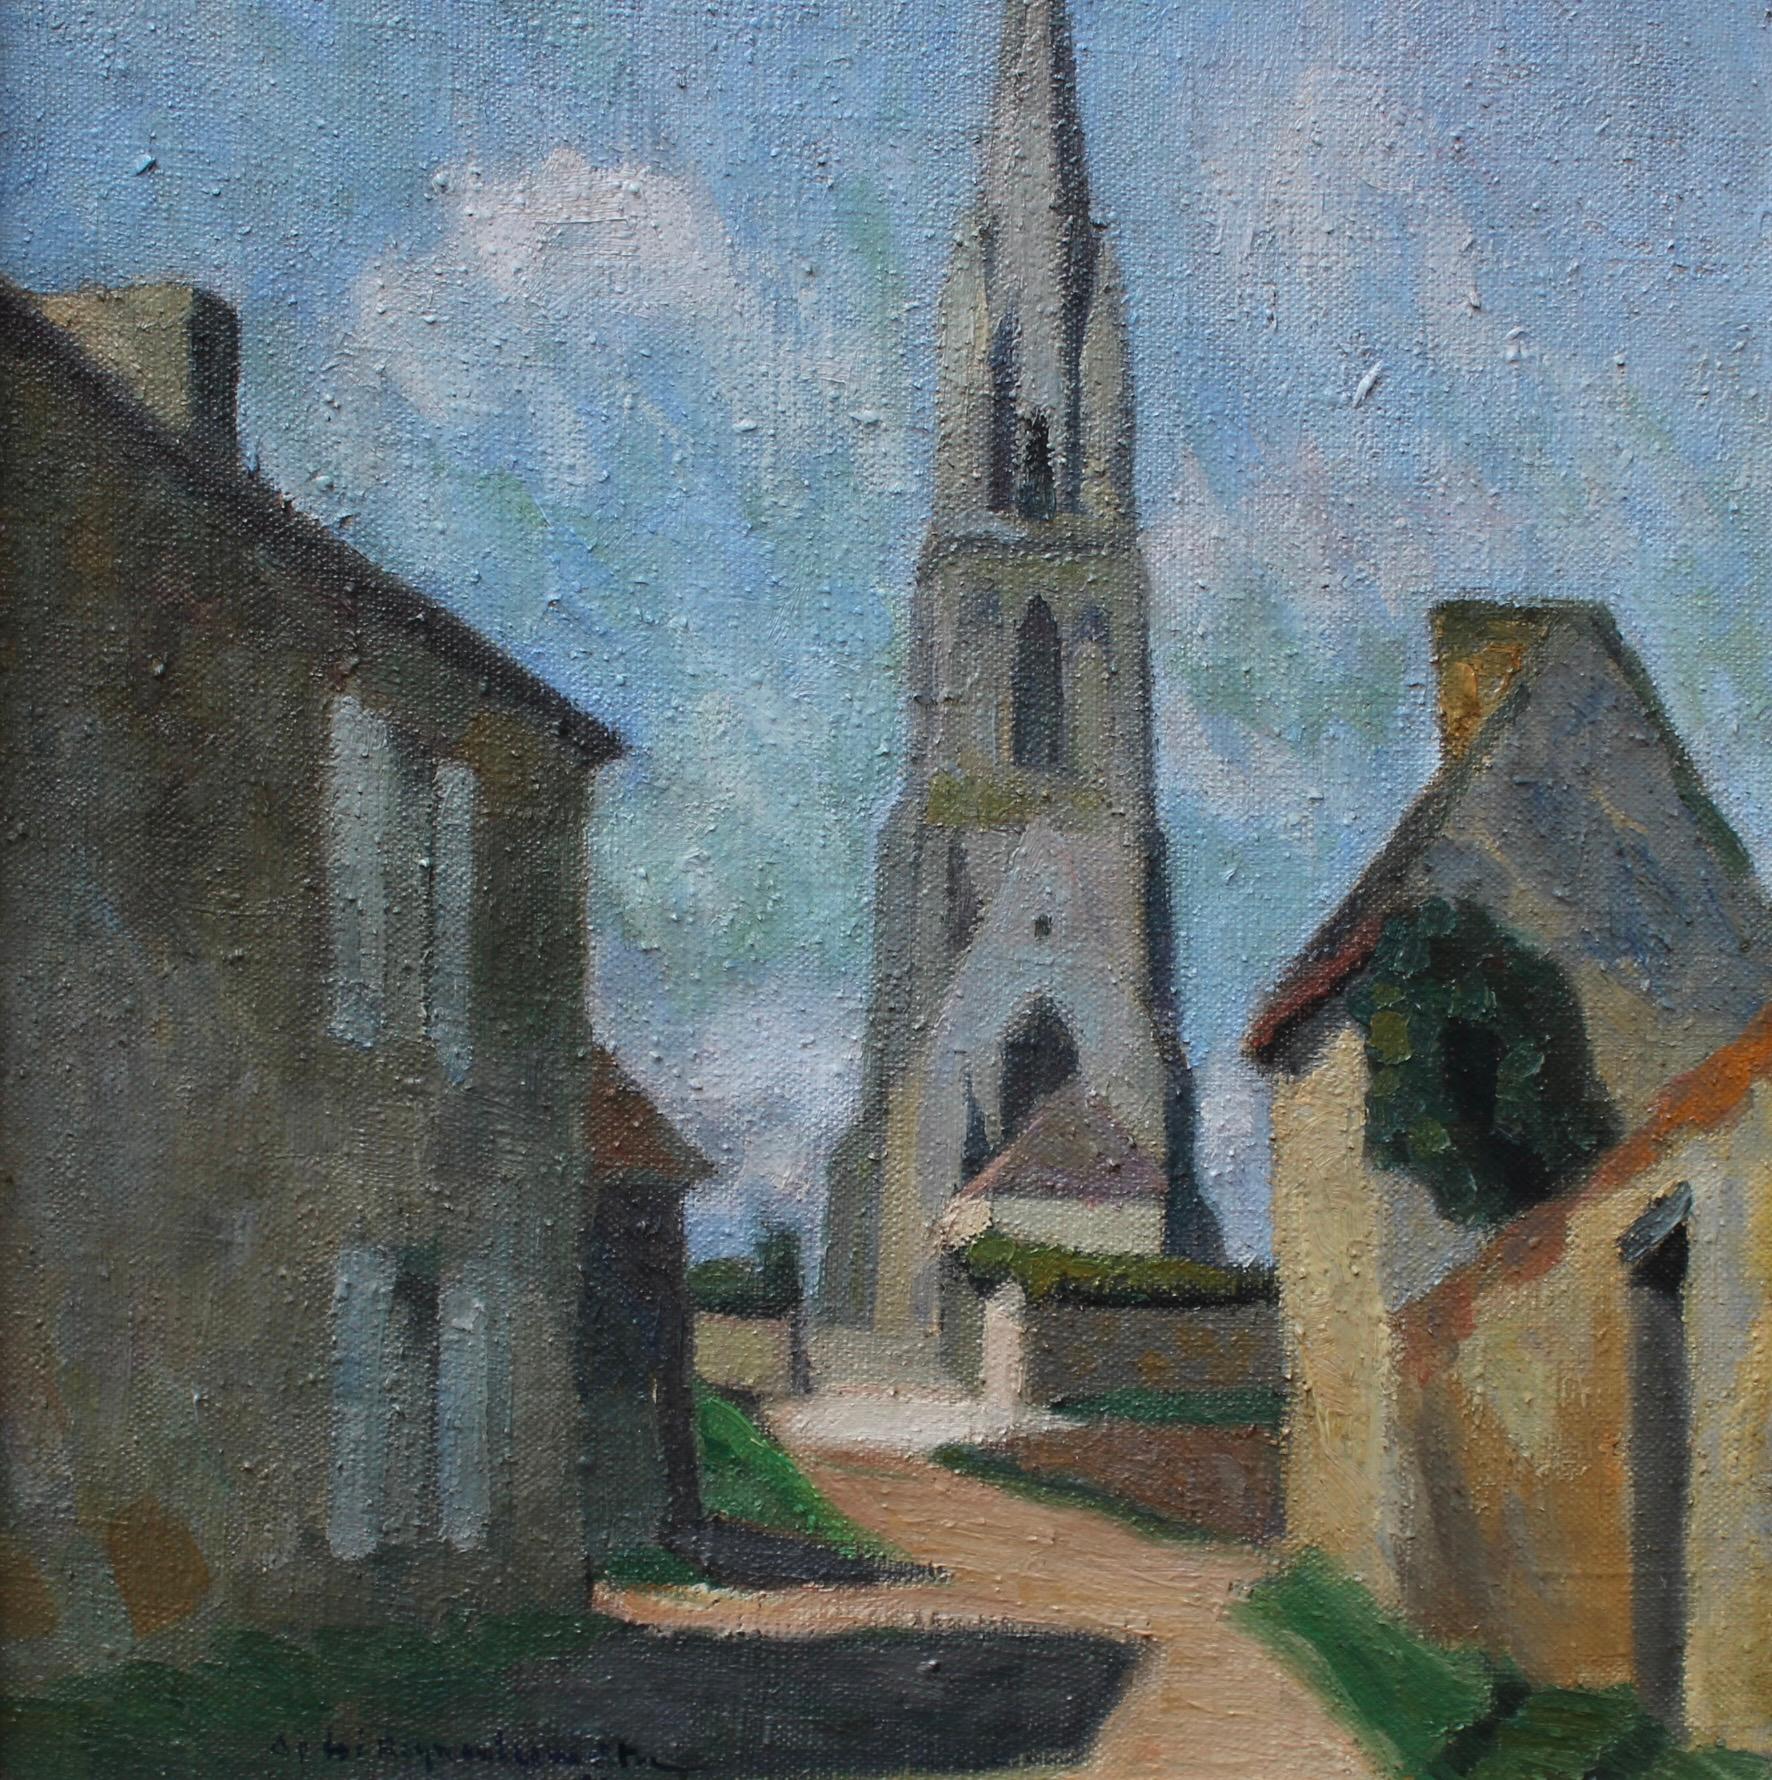 'The Church in Billy' (Calvados Region Normandy), oil on canvas by André Lemaître (1936). Billy is a former commune in Normandy, France. This depiction is mostly likely the church of Saint-Aubin located in Saint-Aubin-sur-Mer. The church was built